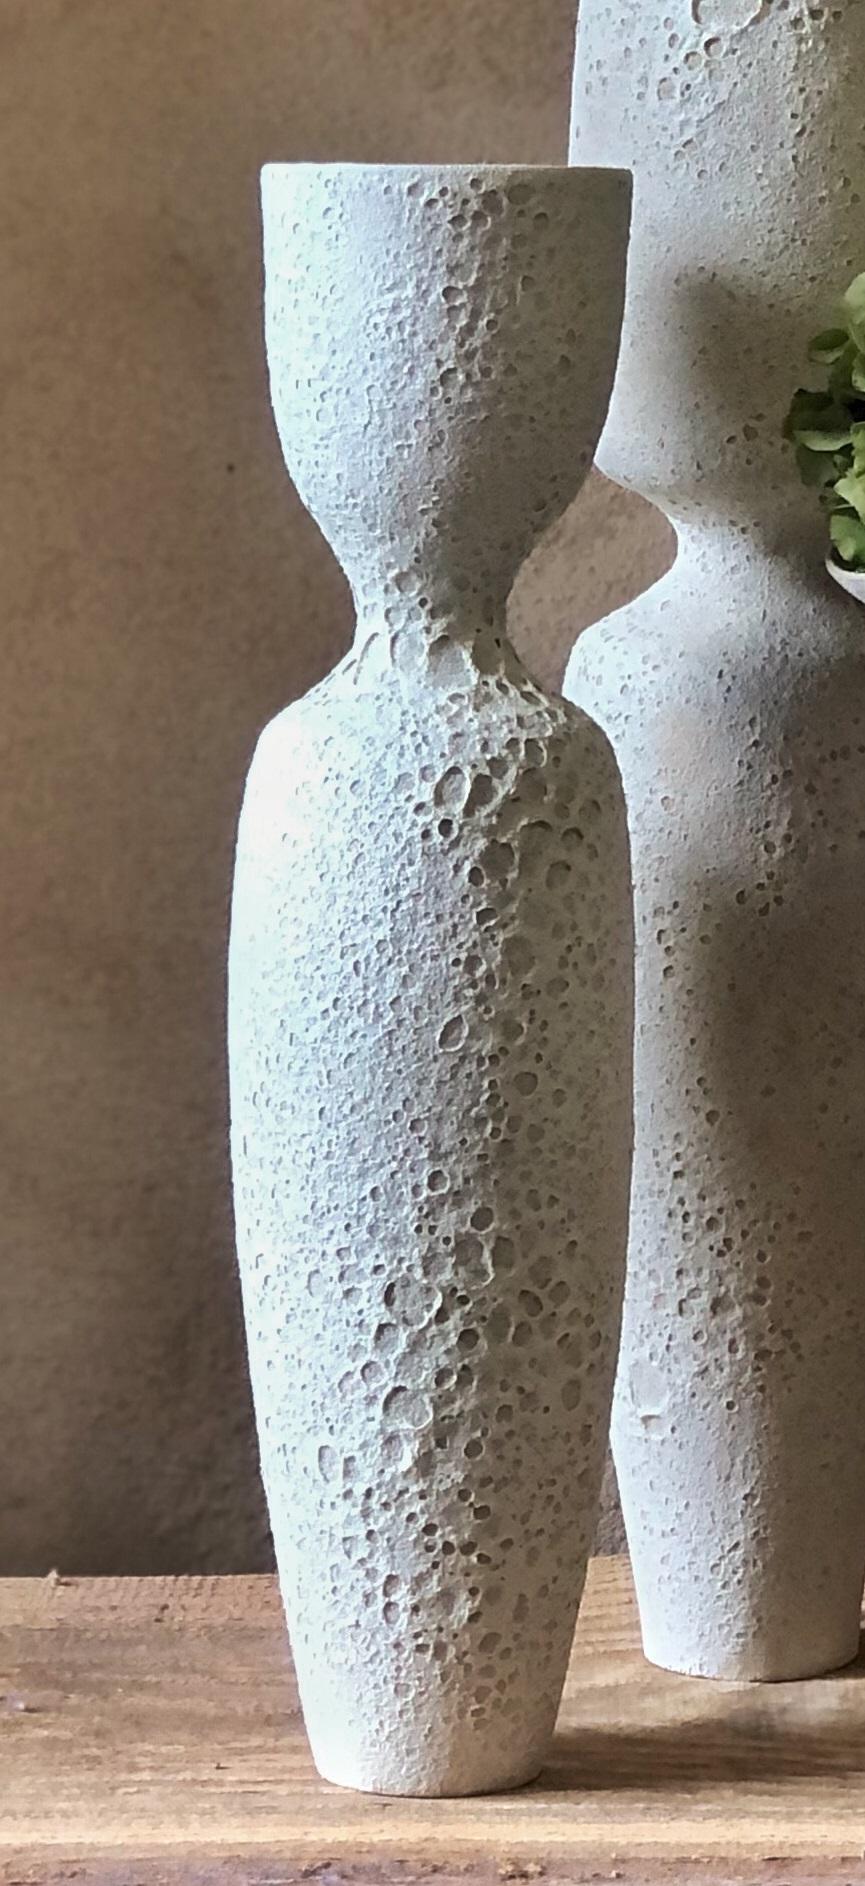 Corolla Crater Vase by Sophie Vaidie
One Of A Kind.
Dimensions: D 15,5 x W 21,5 x H 35 cm. 
Materials: Beige stoneware with crater glaze.

In the beginning, there was a need to make, with the hands, the touch, the senses. Then came the desire to